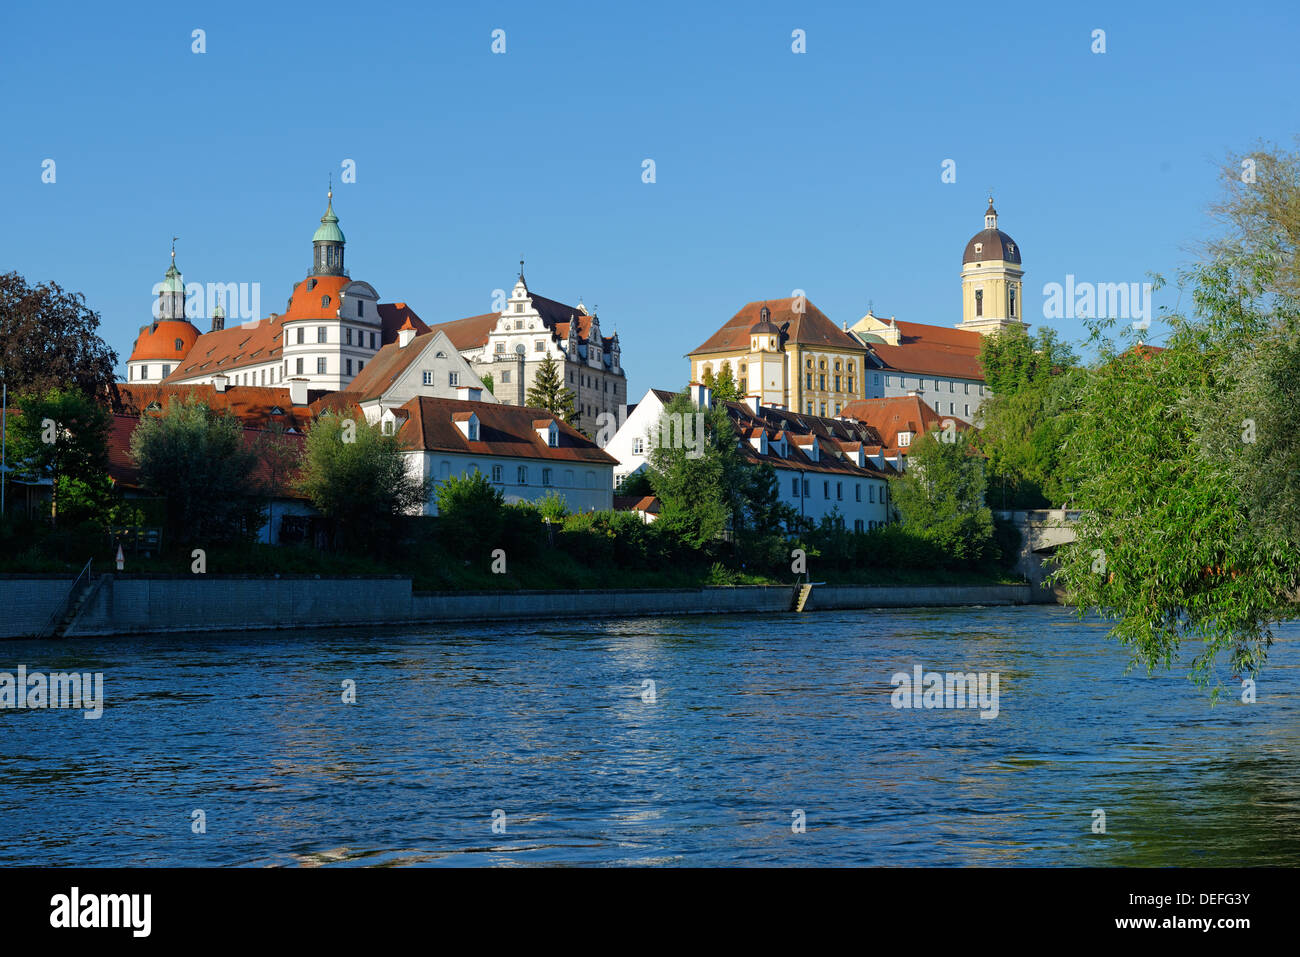 Ducal Palace and Church of the Royal Court above the Danube River, Neuburg an der Donau, Upper Bavaria, Bavaria, Germany Stock Photo